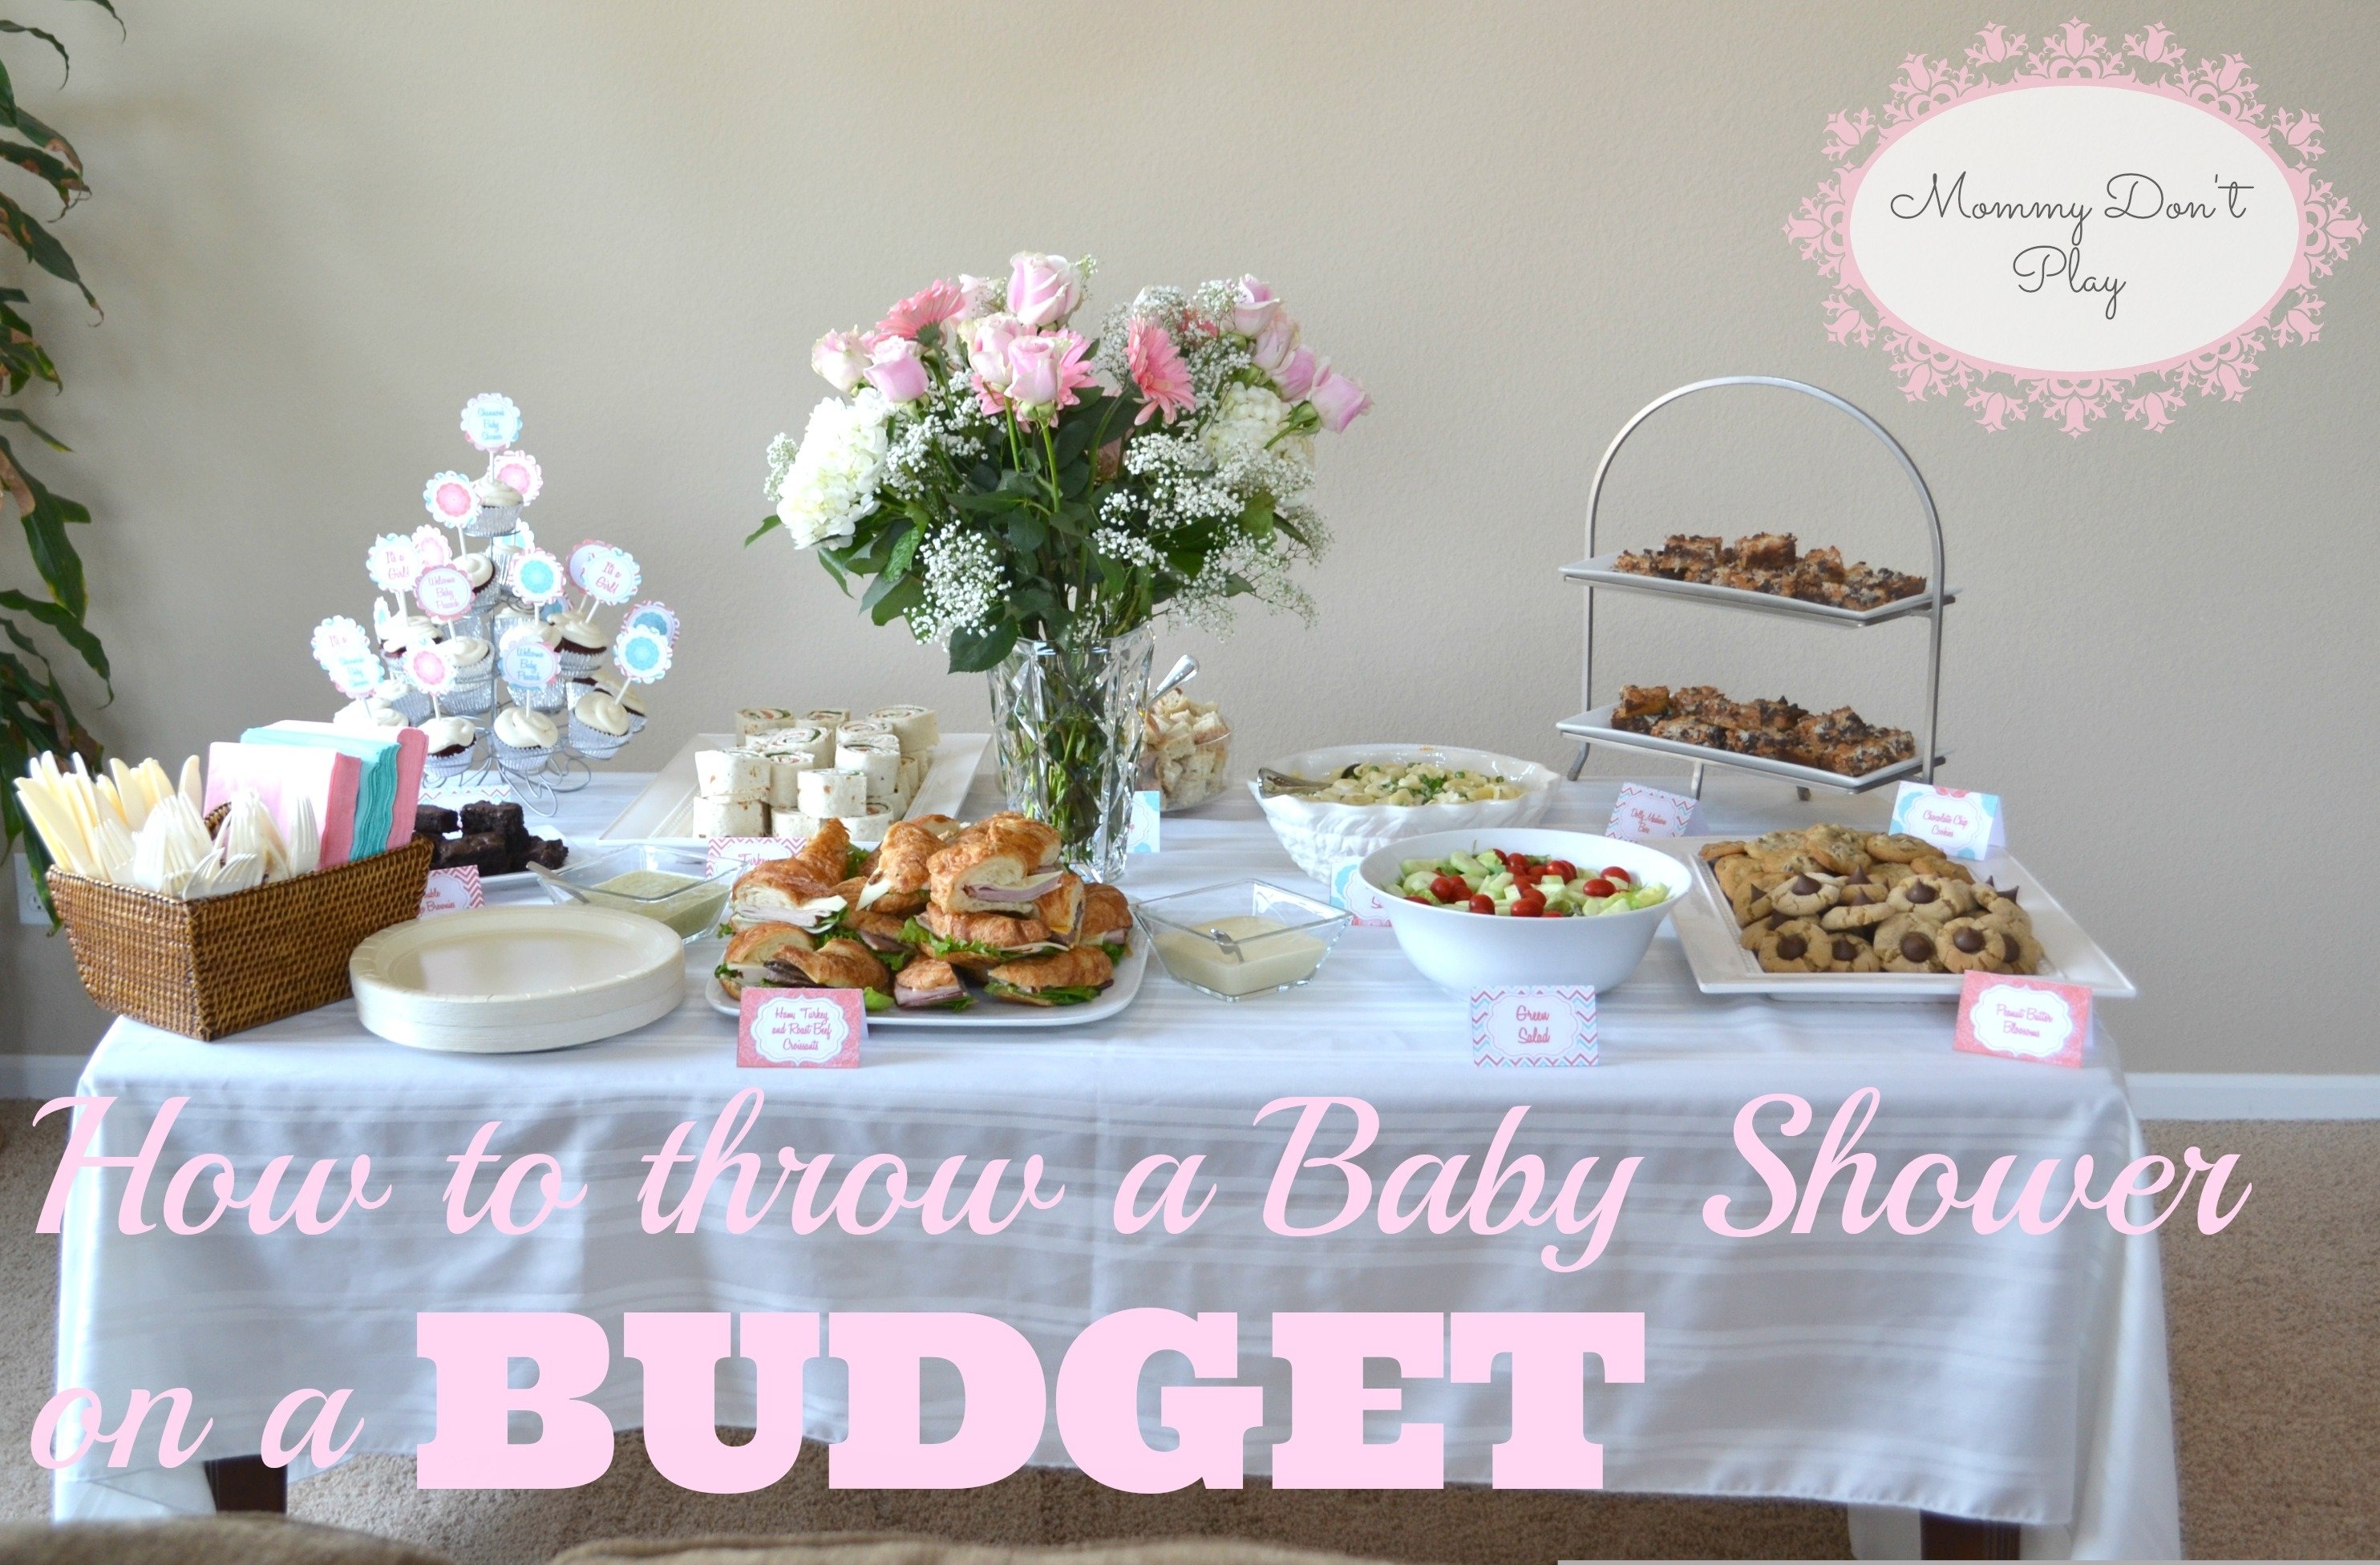 10 Attractive Baby Shower Ideas On A Budget baby showers on a budget gidiye redformapolitica co 2022